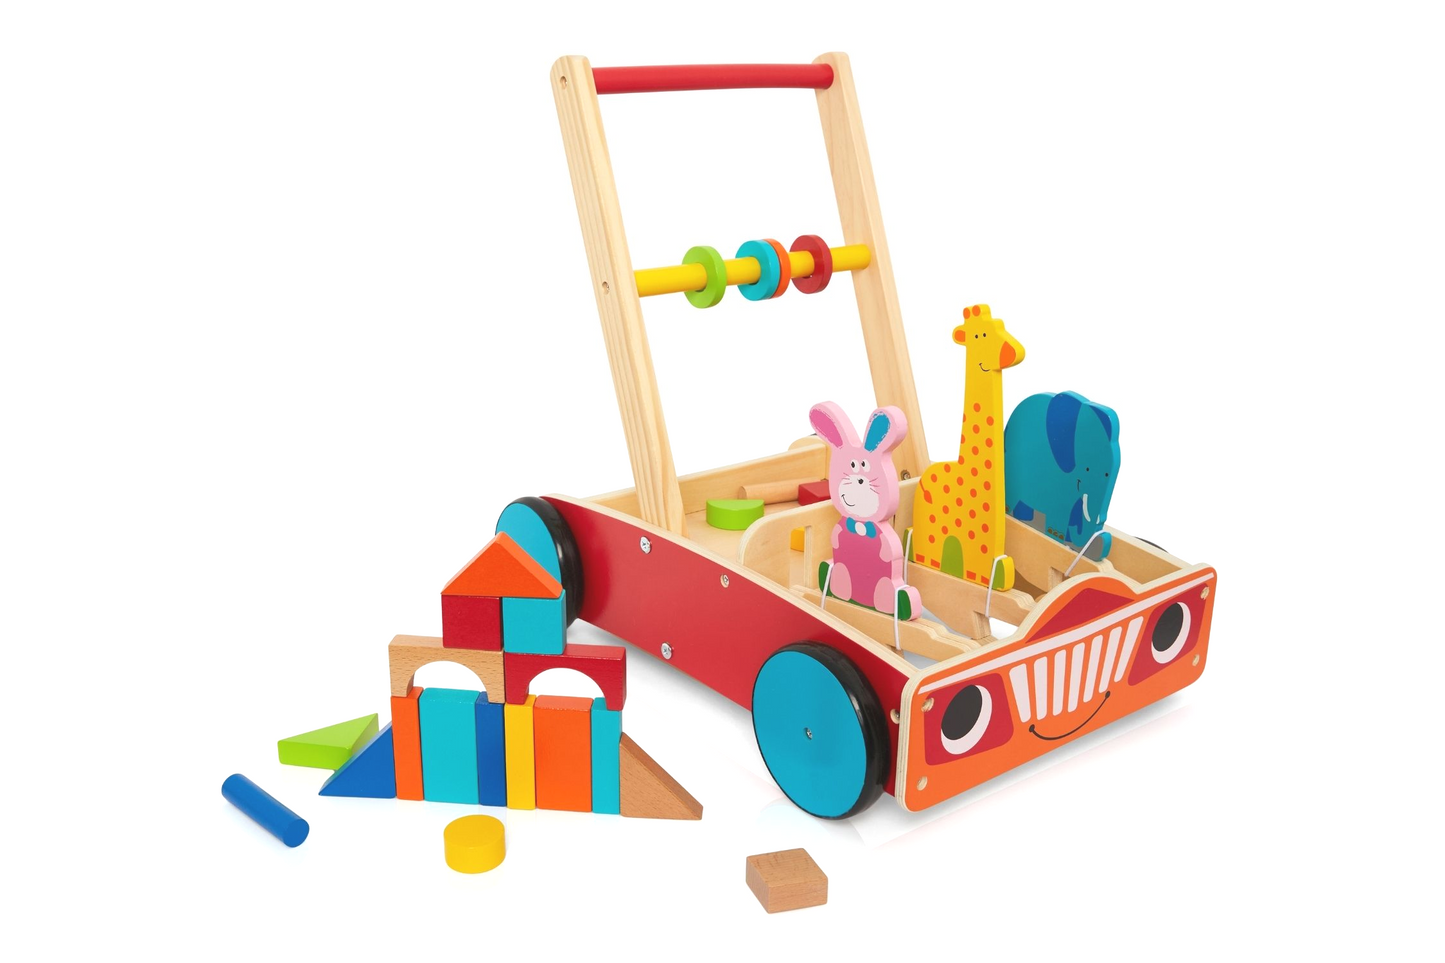 Wooden push along walker for babies and young children.  Showing colourful building blocks.